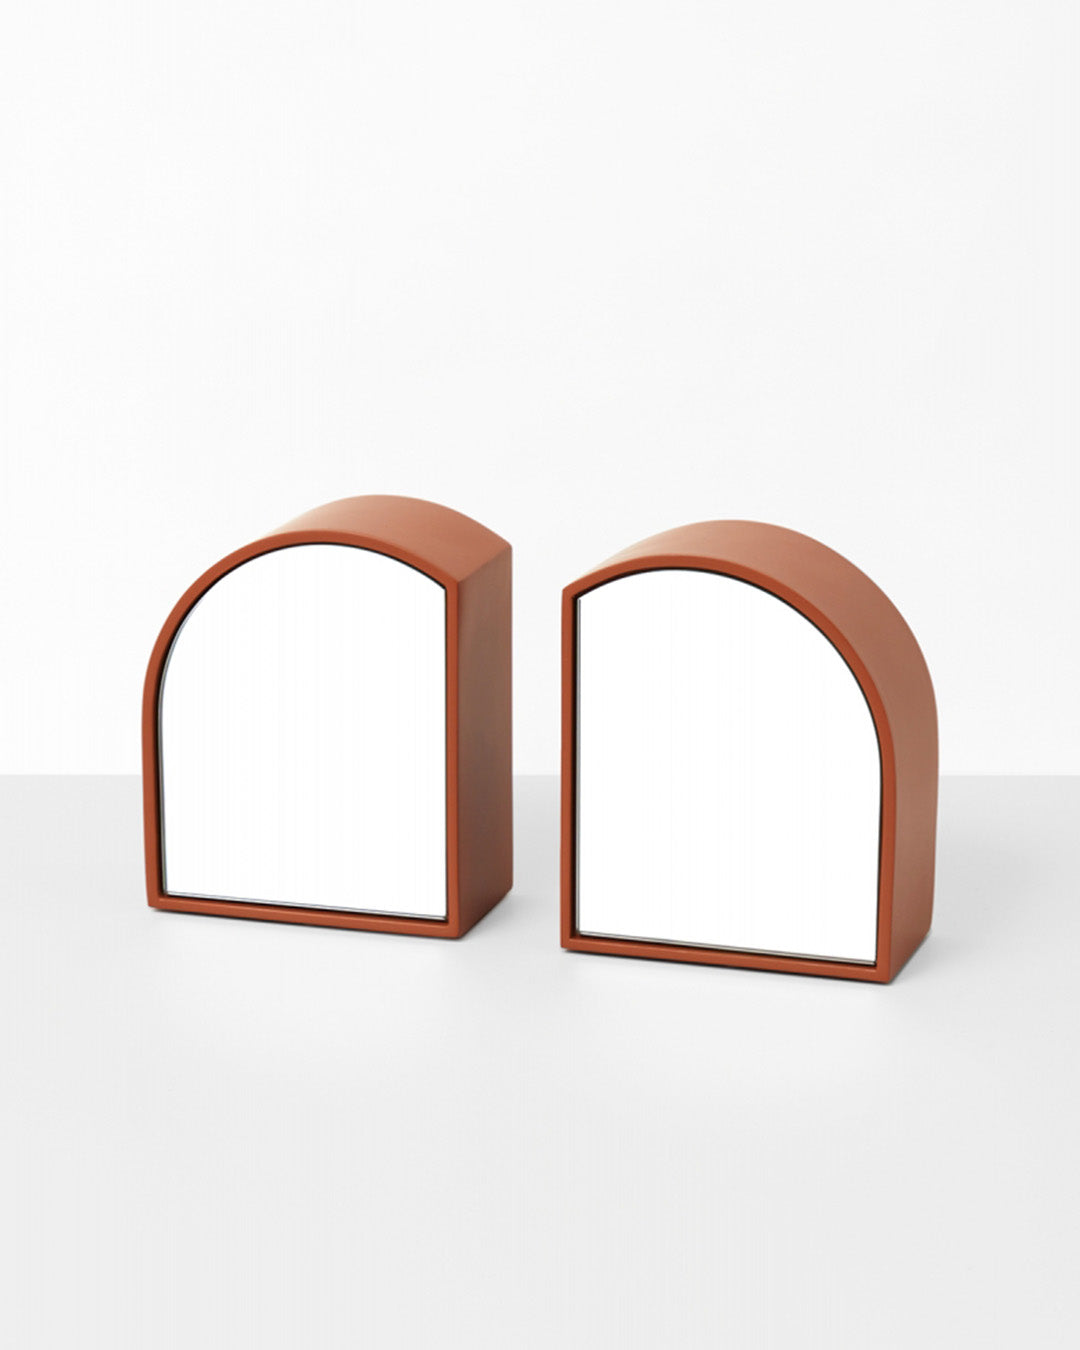 Exploring geometry and reflection, the Archie Bookends are a playful way to add visual interest to a kid's bookcase or desk. Each decorative bookend is double-sided, with a regular mirrored side and a tinted mirror side, allowing for multiple looks and making a feature of your favourite reads.  This product is sold in pairs.